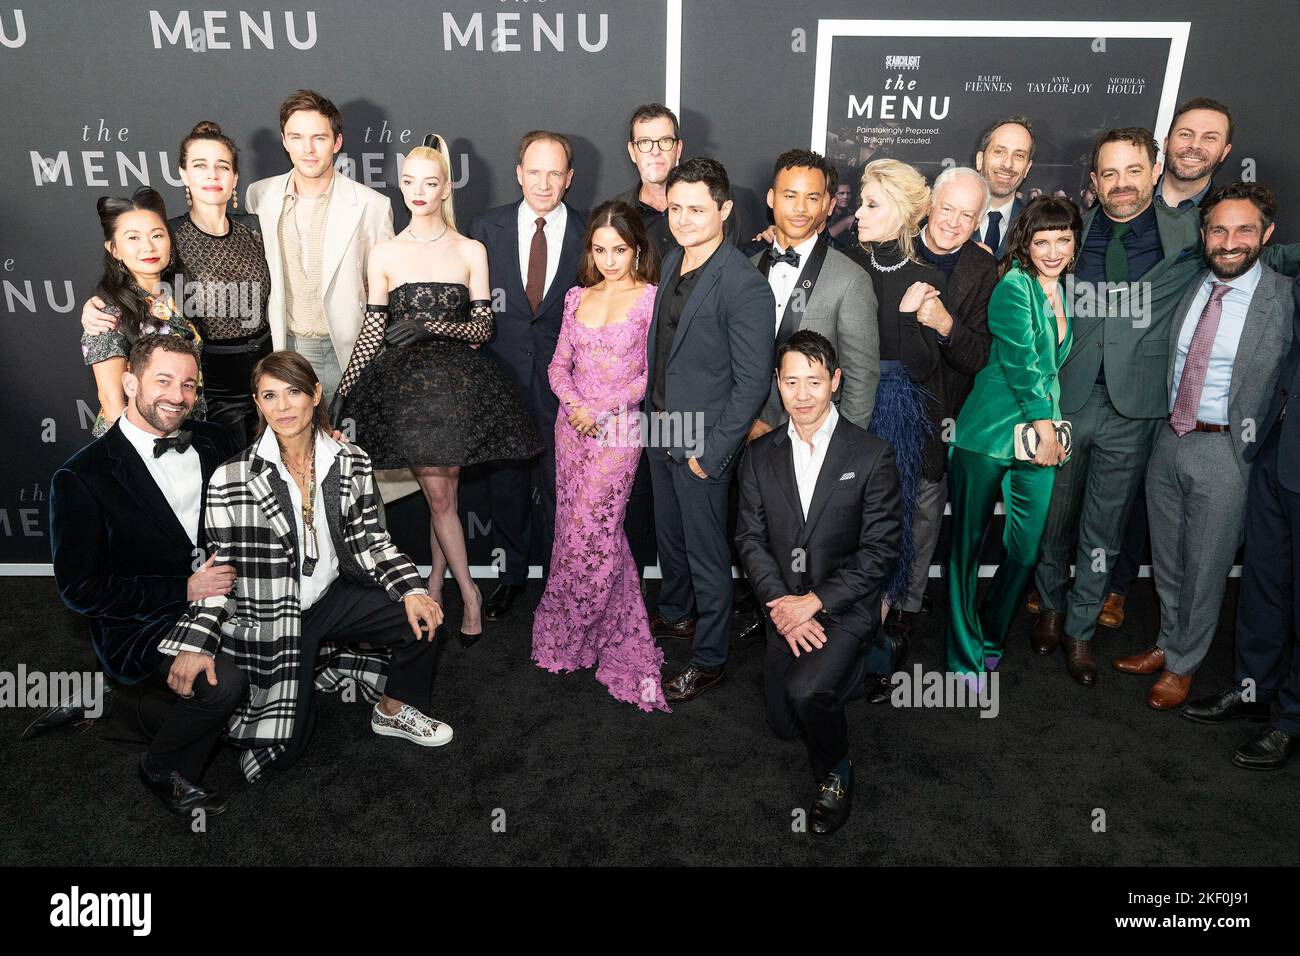 https://c8.alamy.com/comp/2KF0J91/new-york-united-states-14th-nov-2022-cast-and-crew-attend-premiere-of-the-menu-movie-at-amc-lincoln-square-photo-by-lev-radinpacific-press-credit-pacific-press-media-production-corpalamy-live-news-2KF0J91.jpg